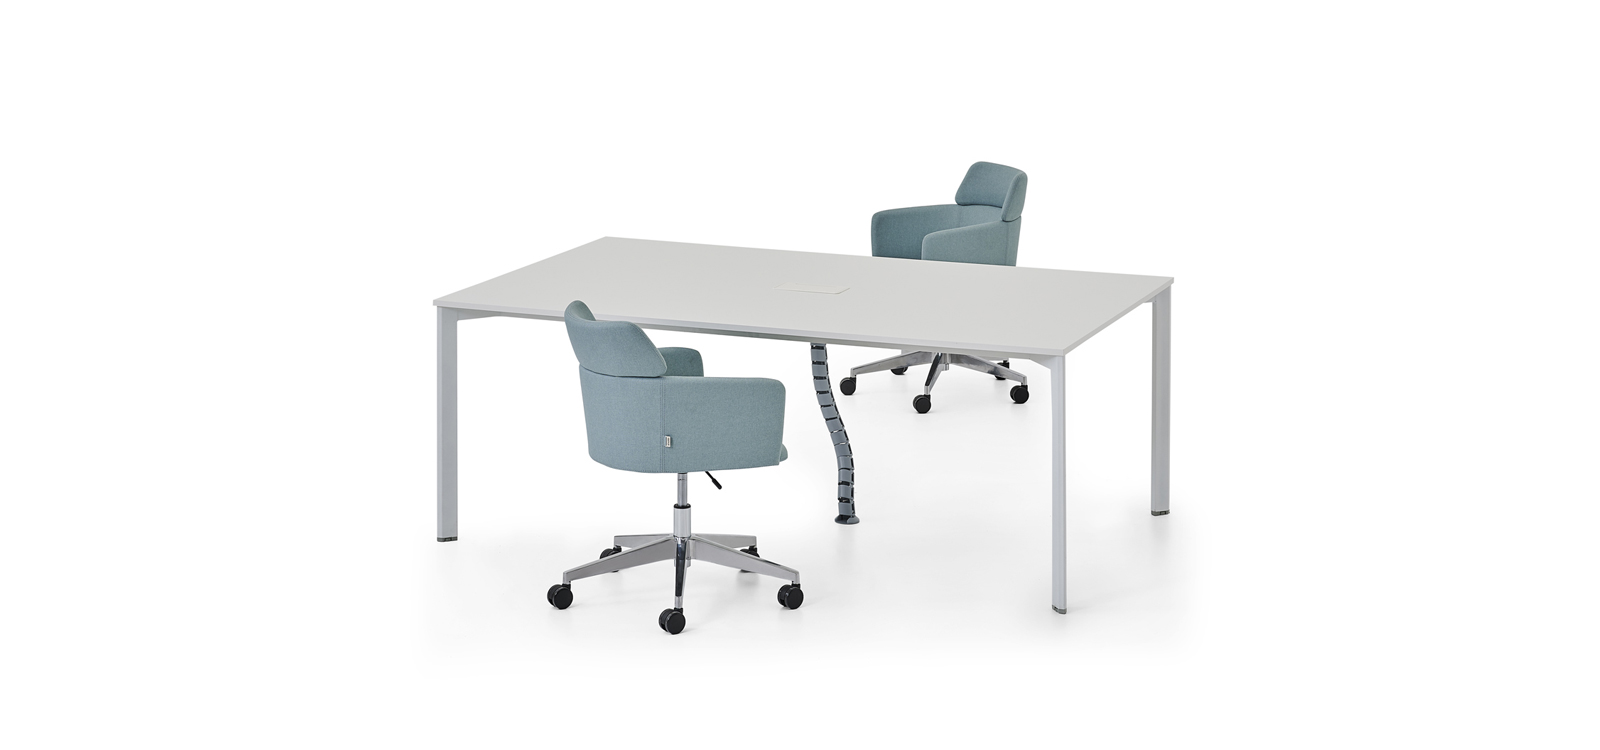 Cargo - Meeting Table